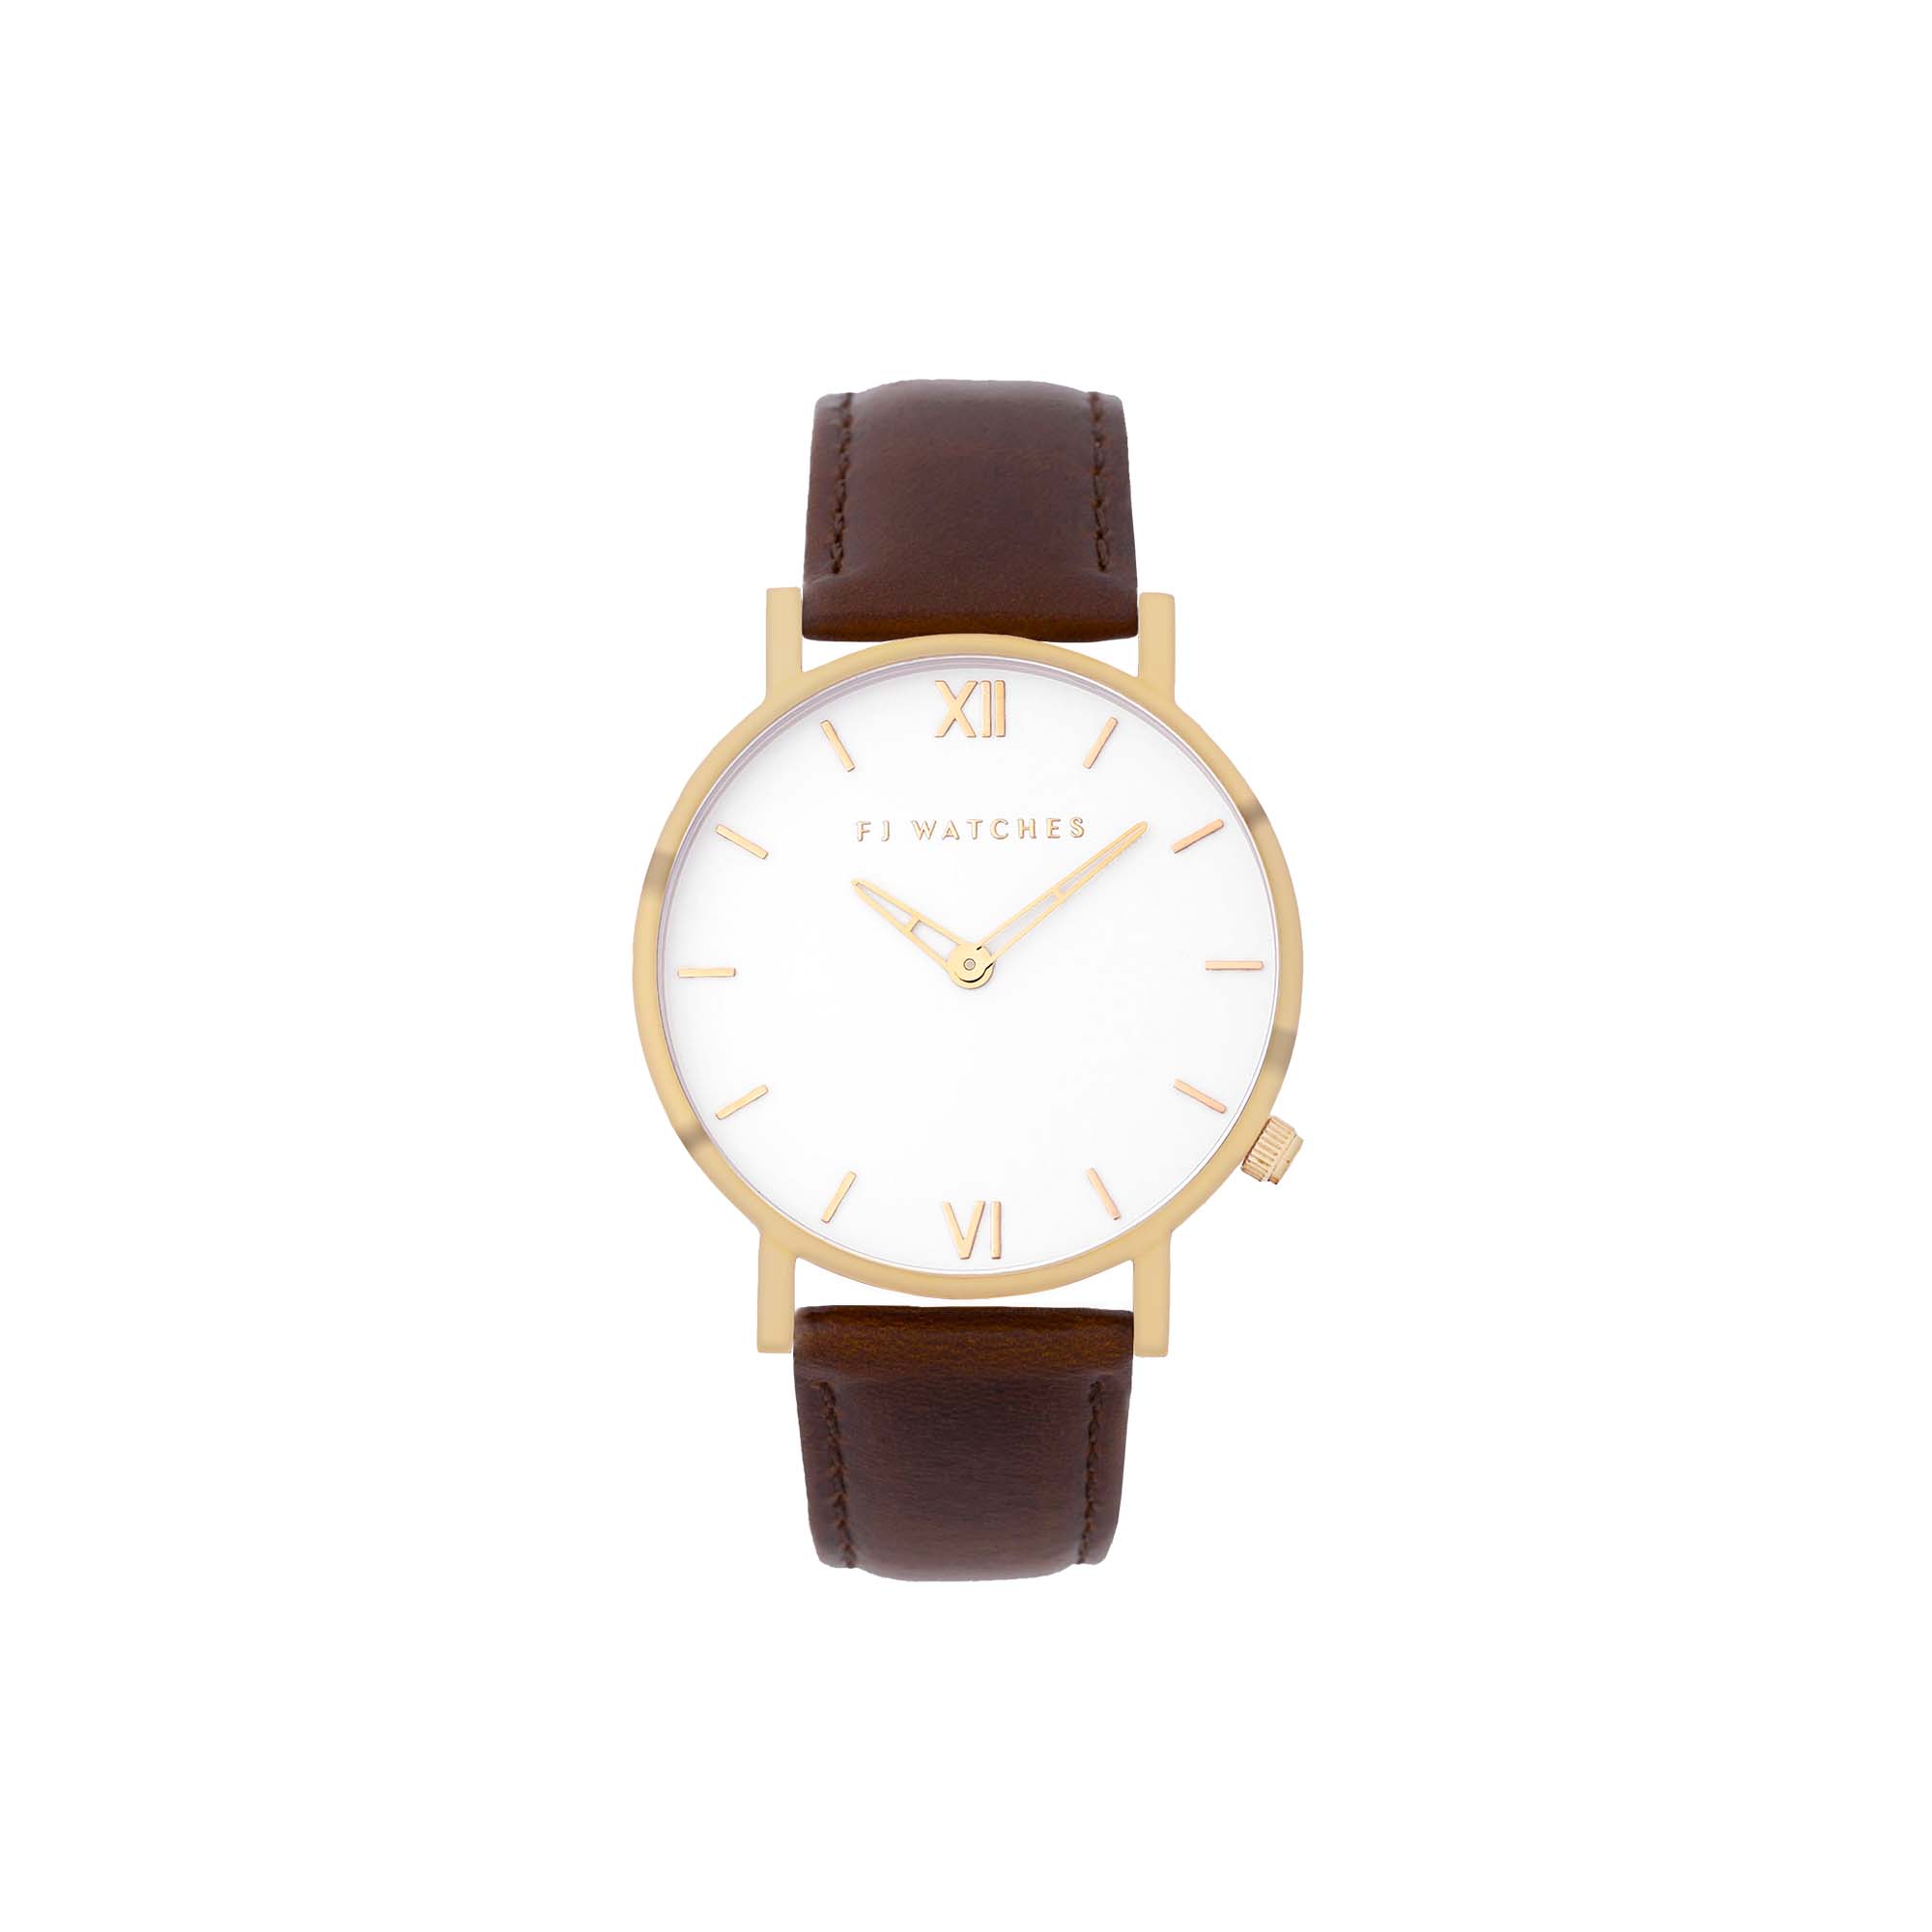 Discover Sunlight, a 42mm men's watch from Five Jwlry with a white and gold dial. This one can be paired with a wide variety of leather colors, such as black, brown and olive green!